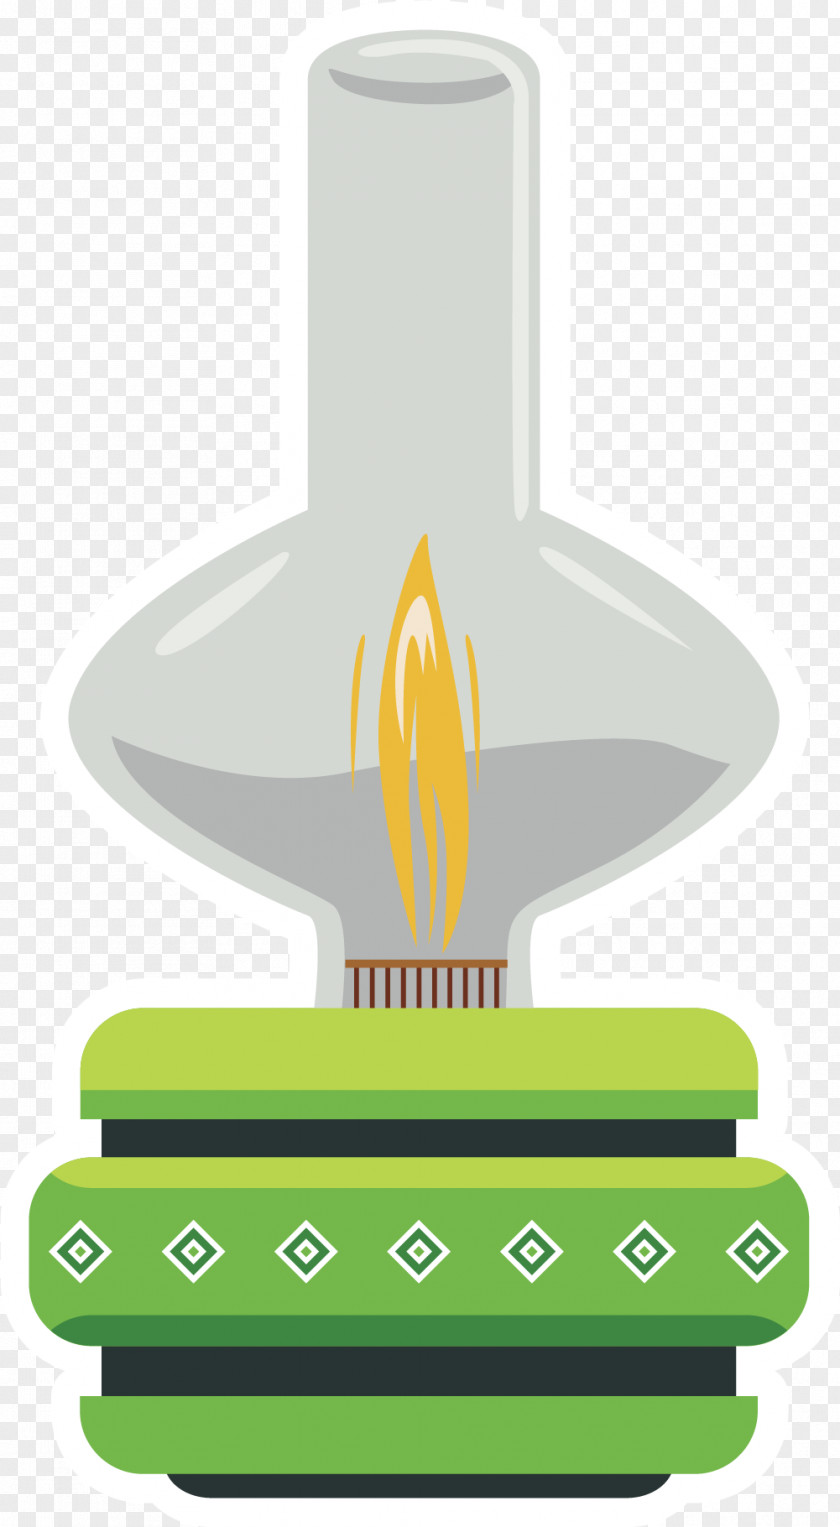 Simple Oil Lamp For Eid UL Fitr Lighthouse Of La Serena Cartoon Drawing PNG